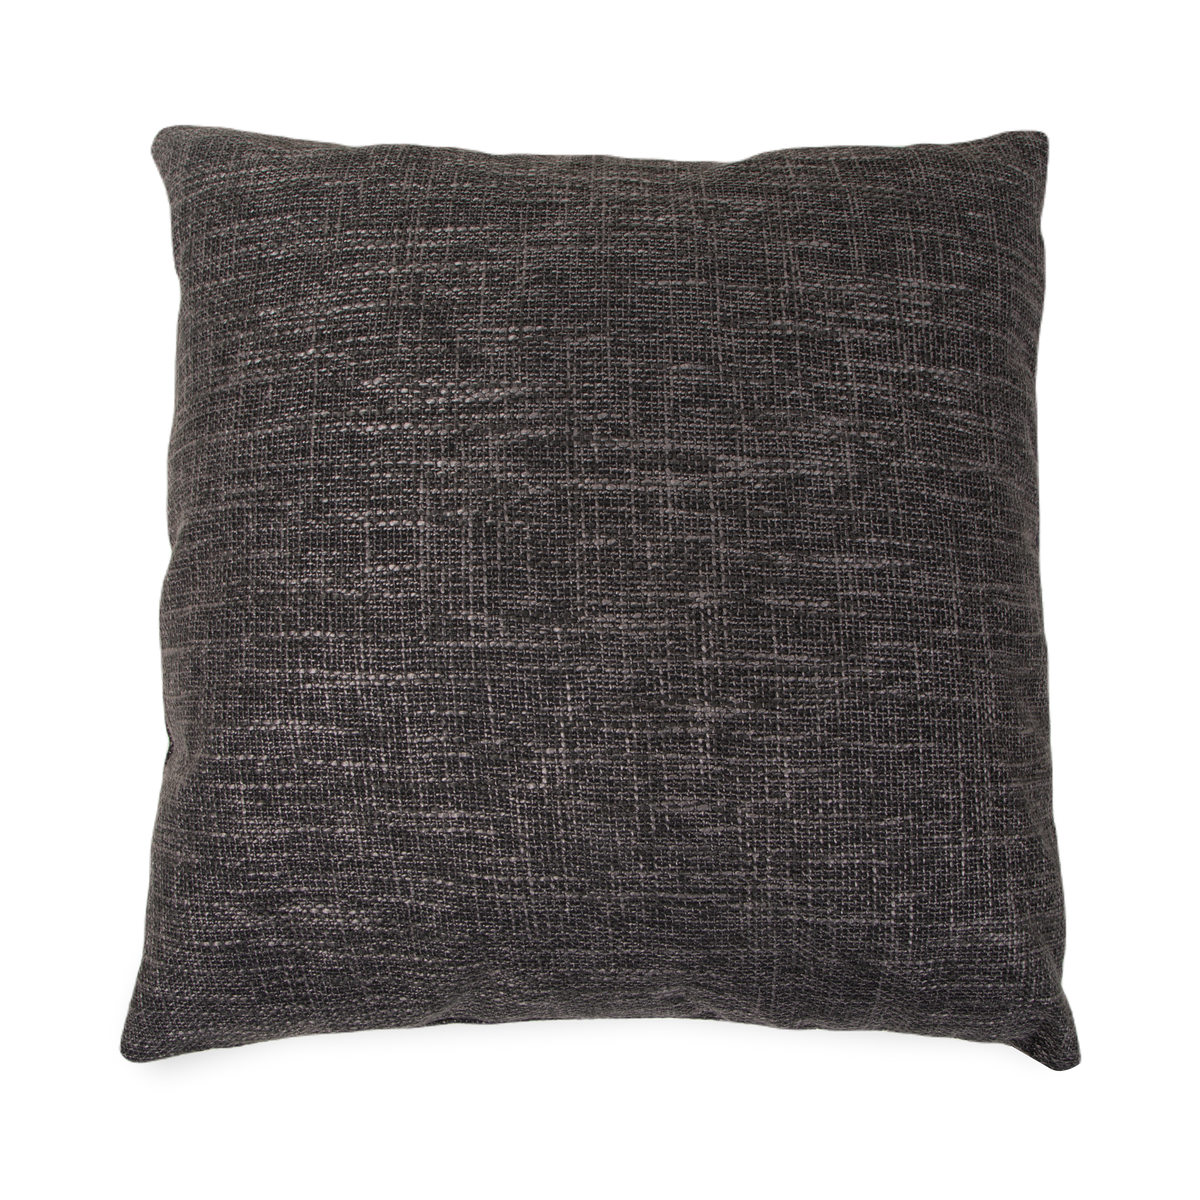 A textural joy, the Woven Pillow is woven in a rustic black textural fabric.